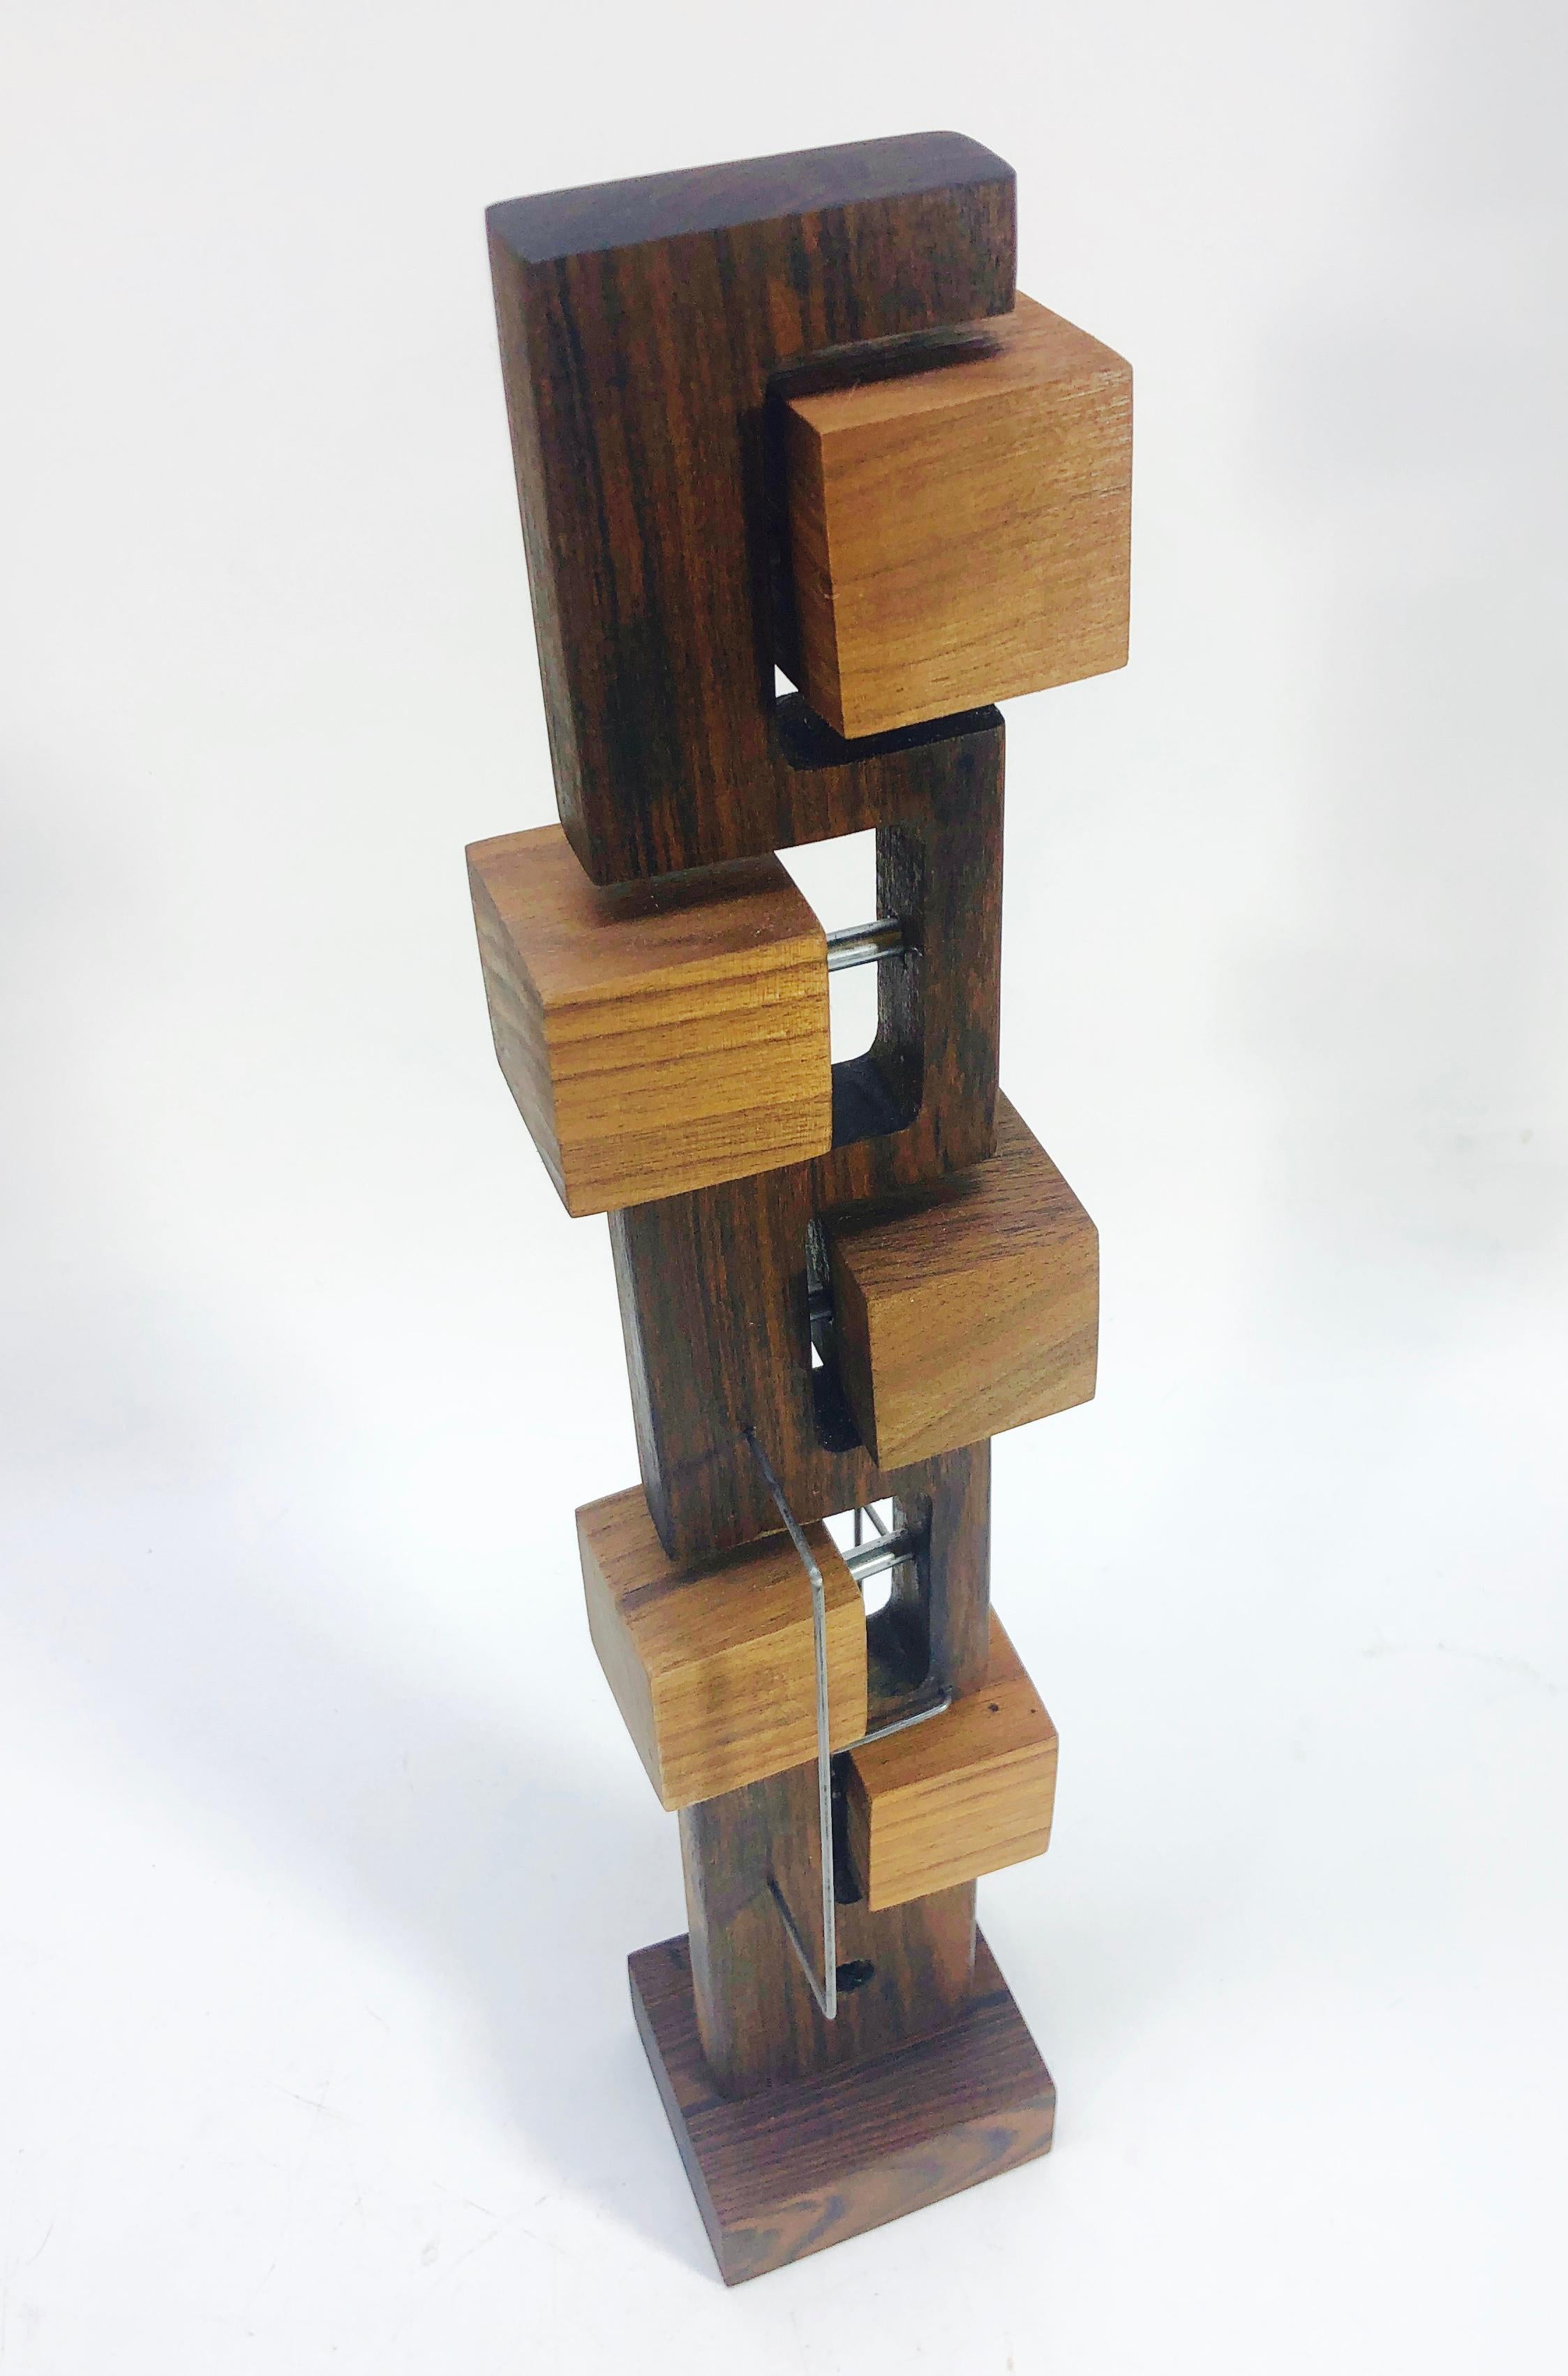 Skyline II by Delaware Artist Adam Henderson. Rosewood, Metal rod.
Signed and dated.
2019.